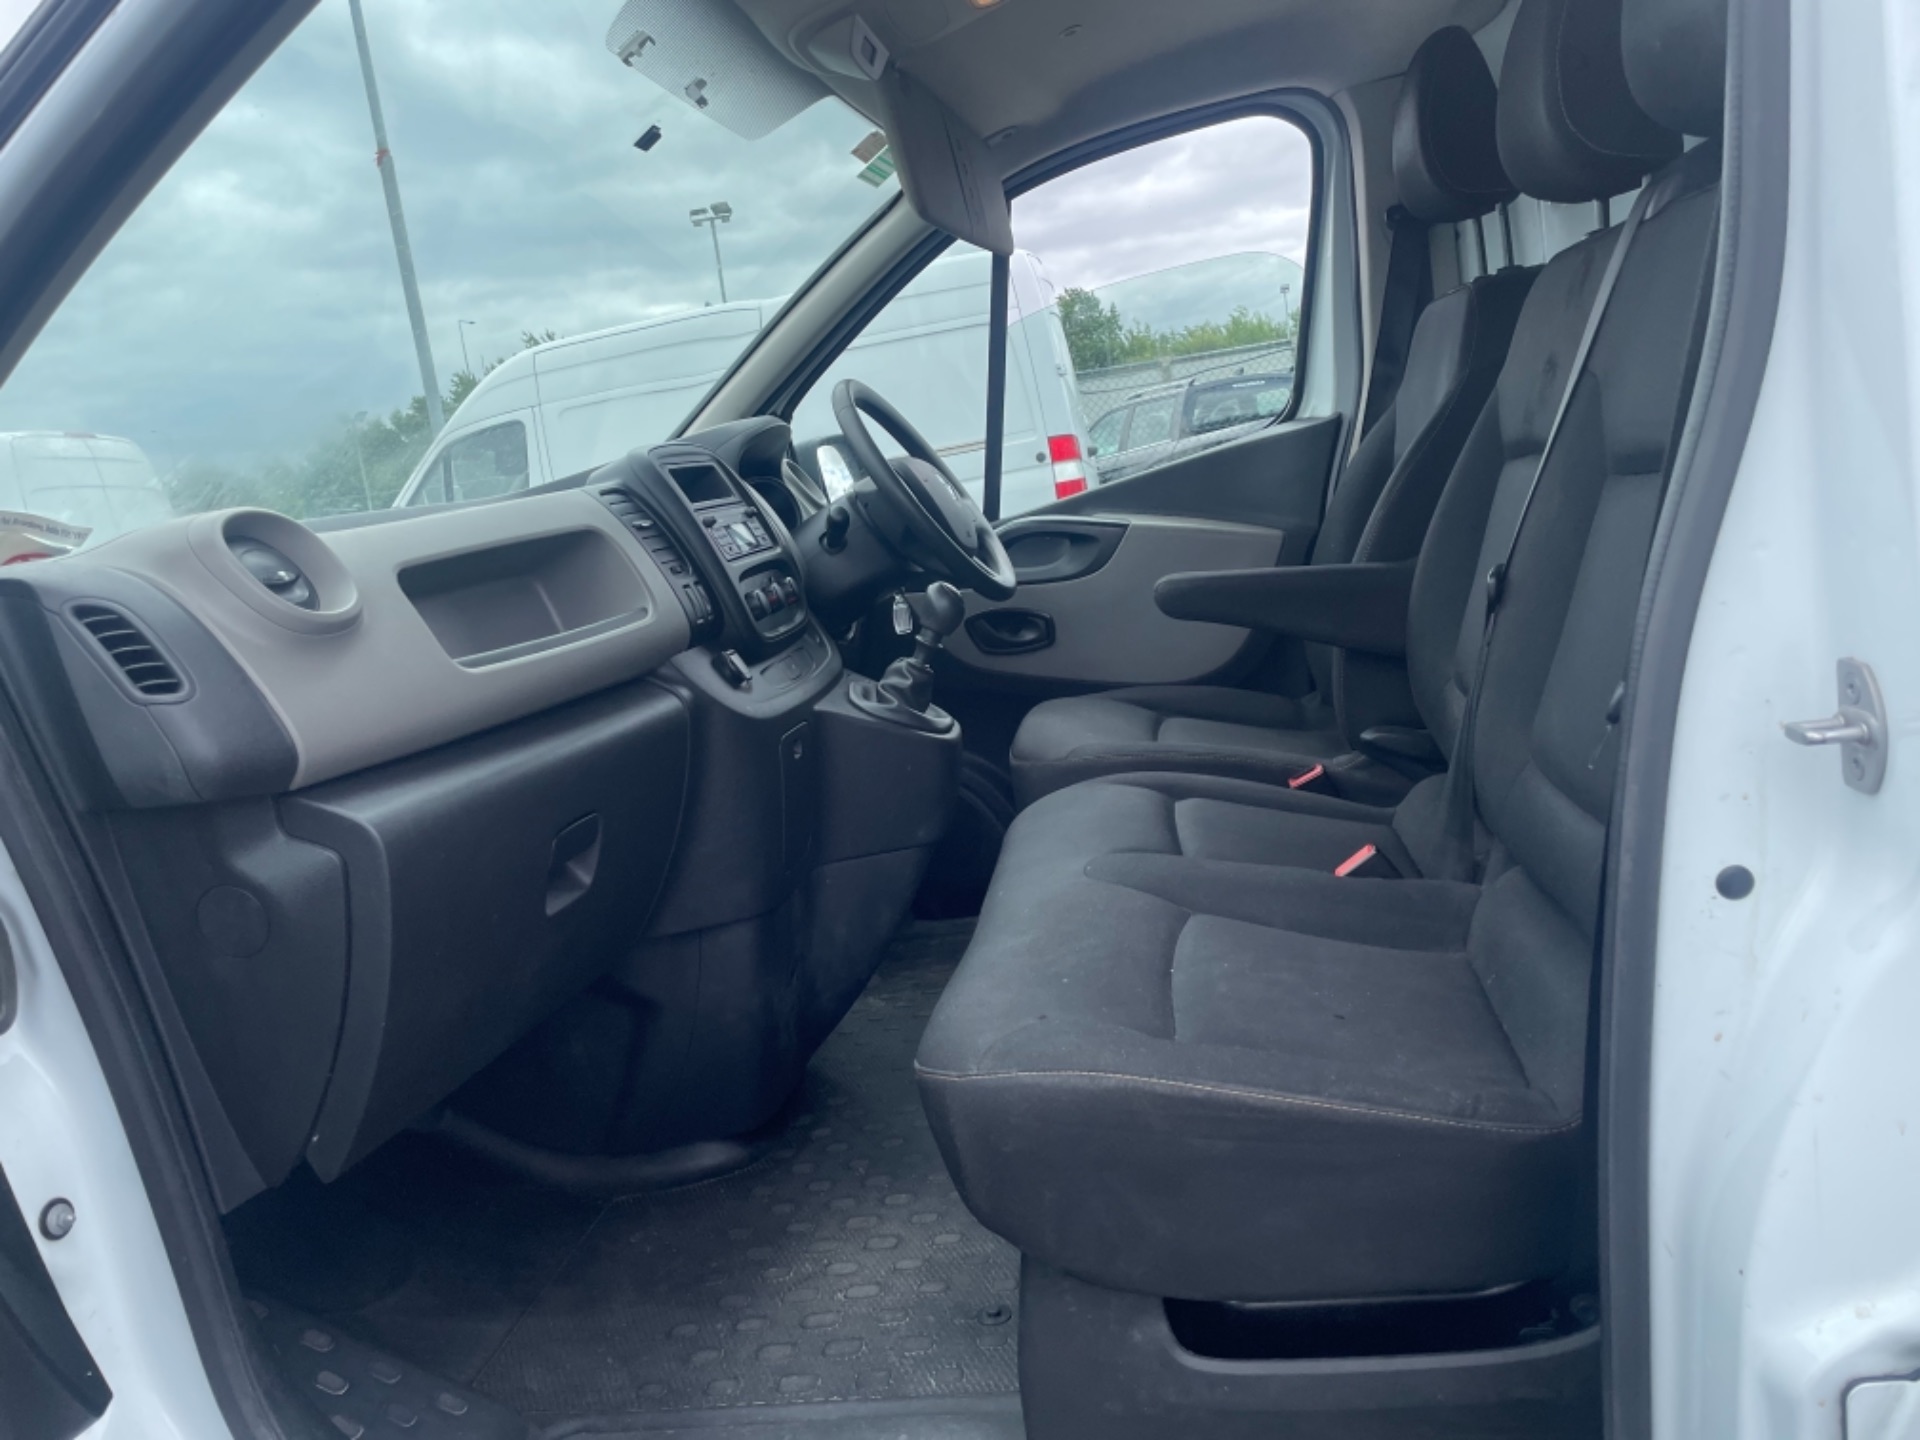 2019 Renault Trafic LL29 DCI 120 Business (191D16446) Image 11